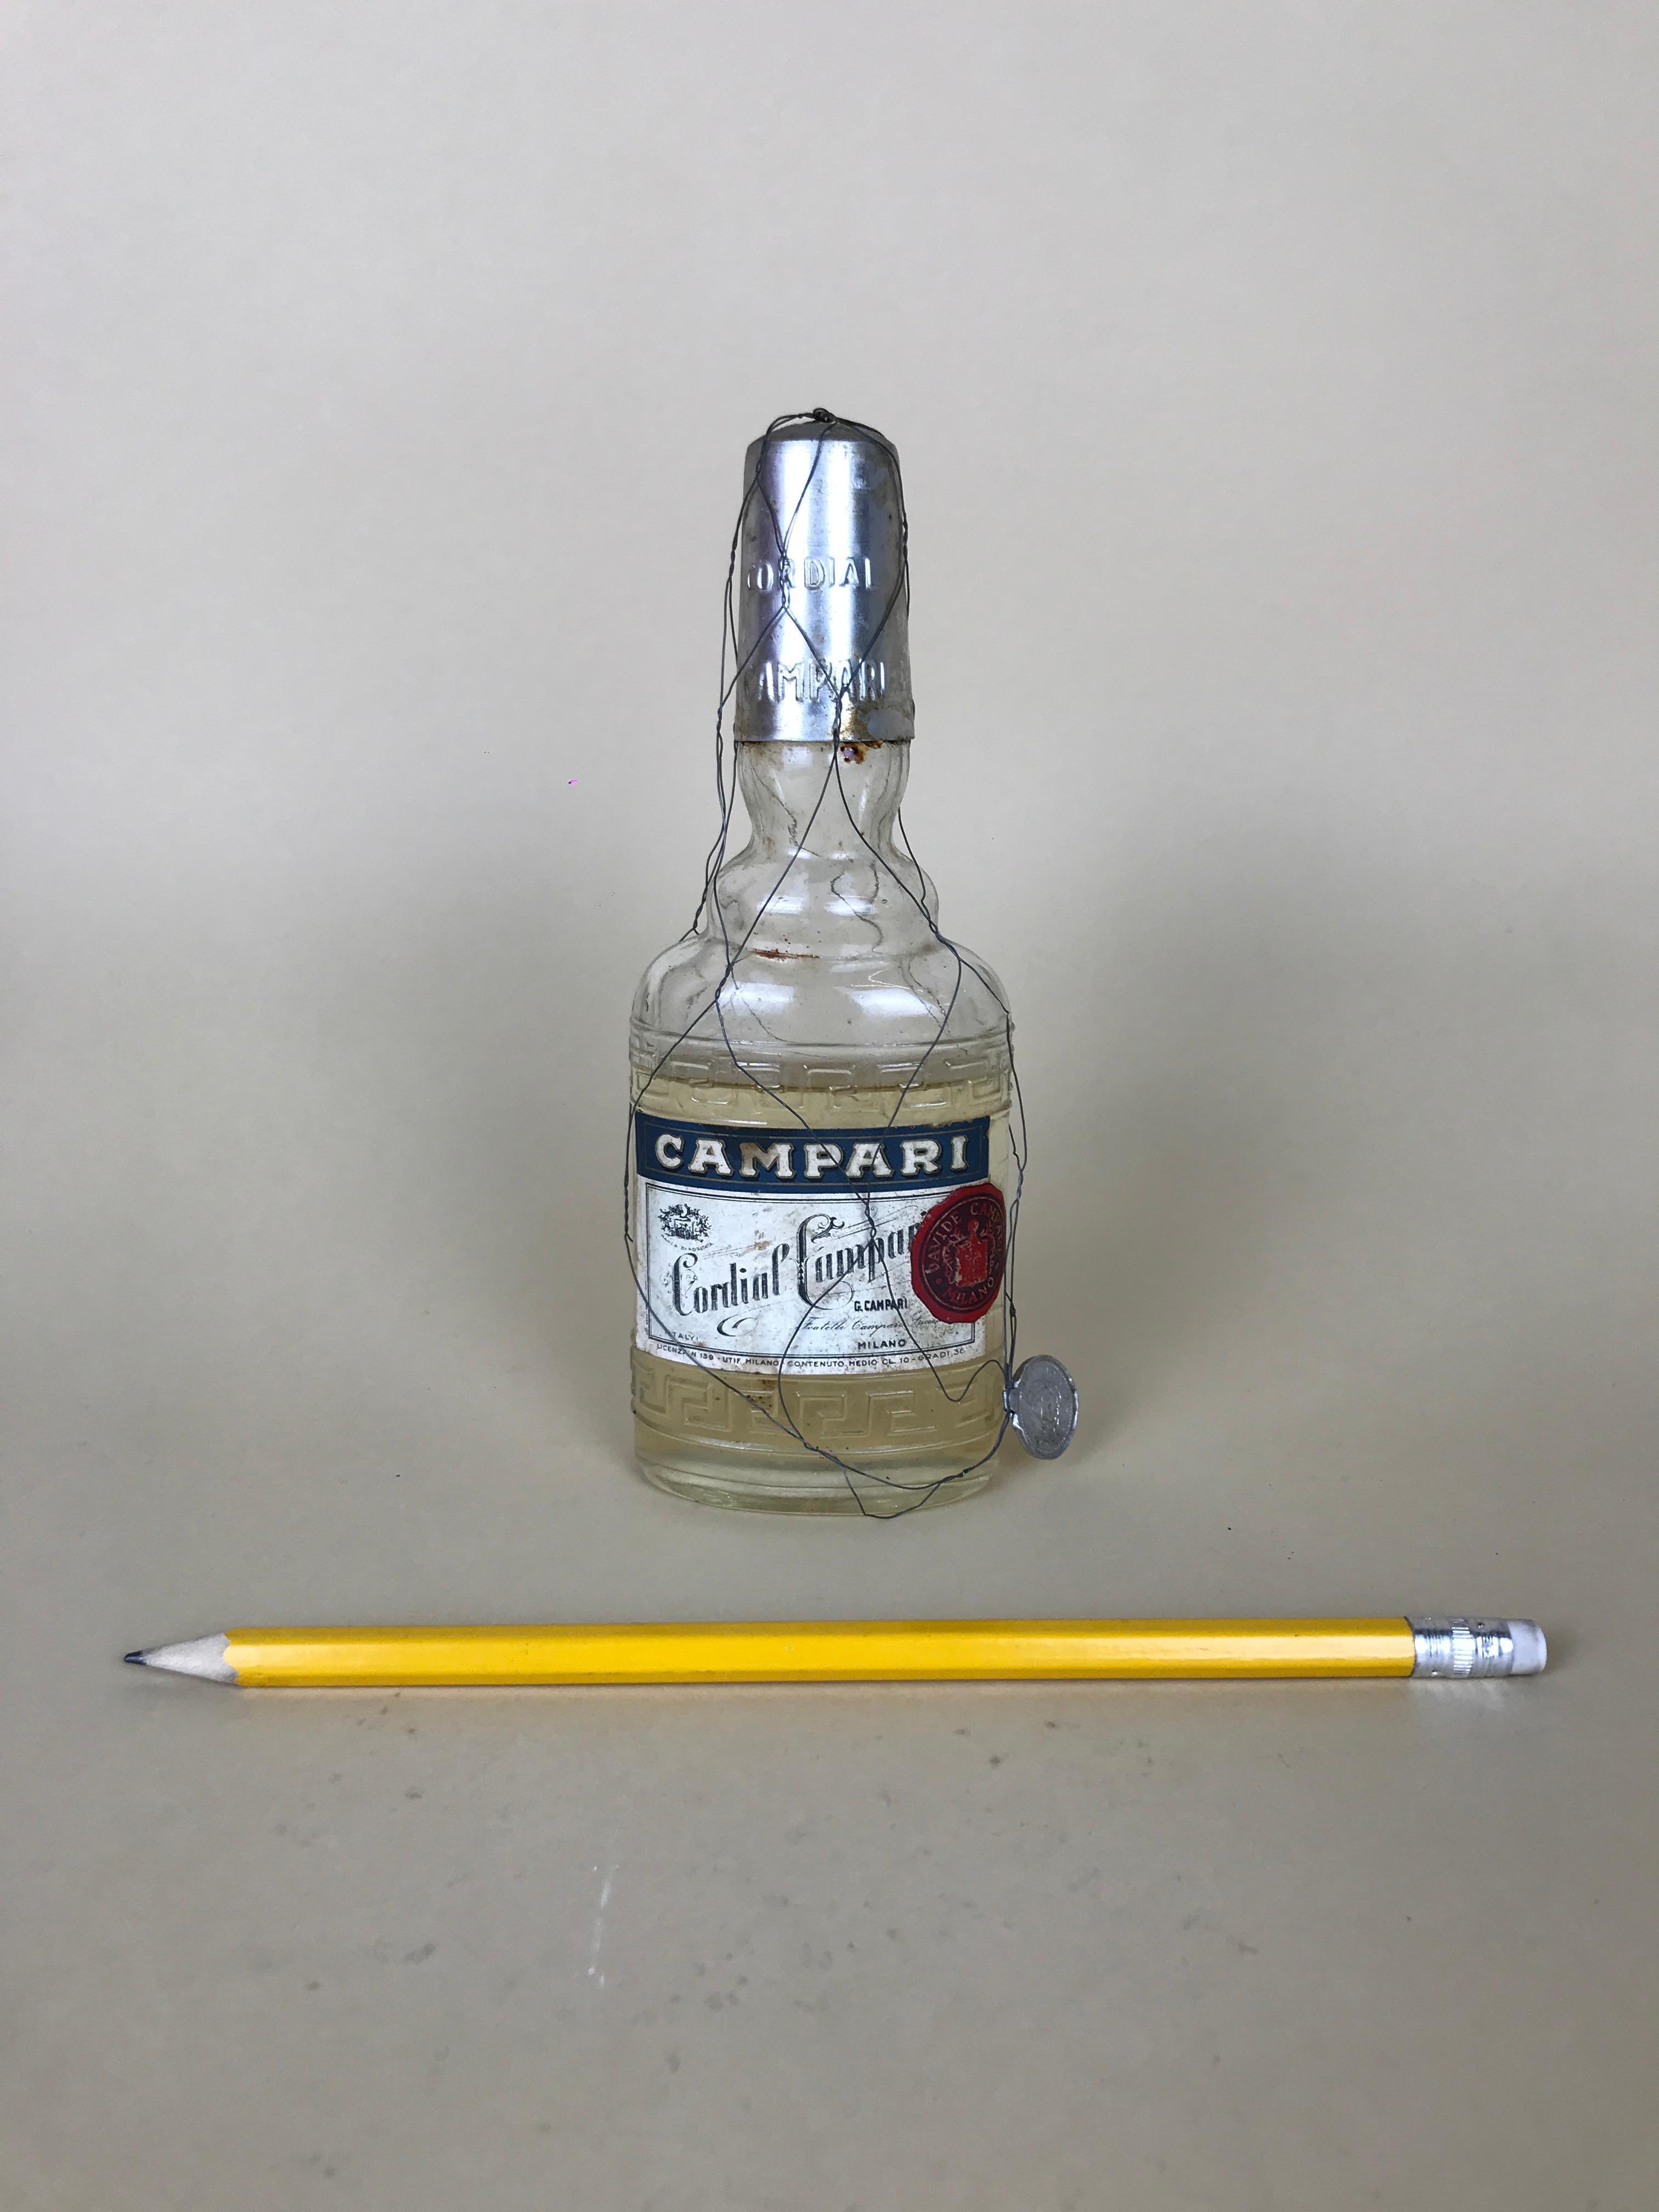 This rare vintage Cordial Campari glass flask is totally iconic! Both for its limited edition as bottle both because this Raspberry flavoured liqueur was produced only in the spring/summer season.

The bottle is full with original liquor with